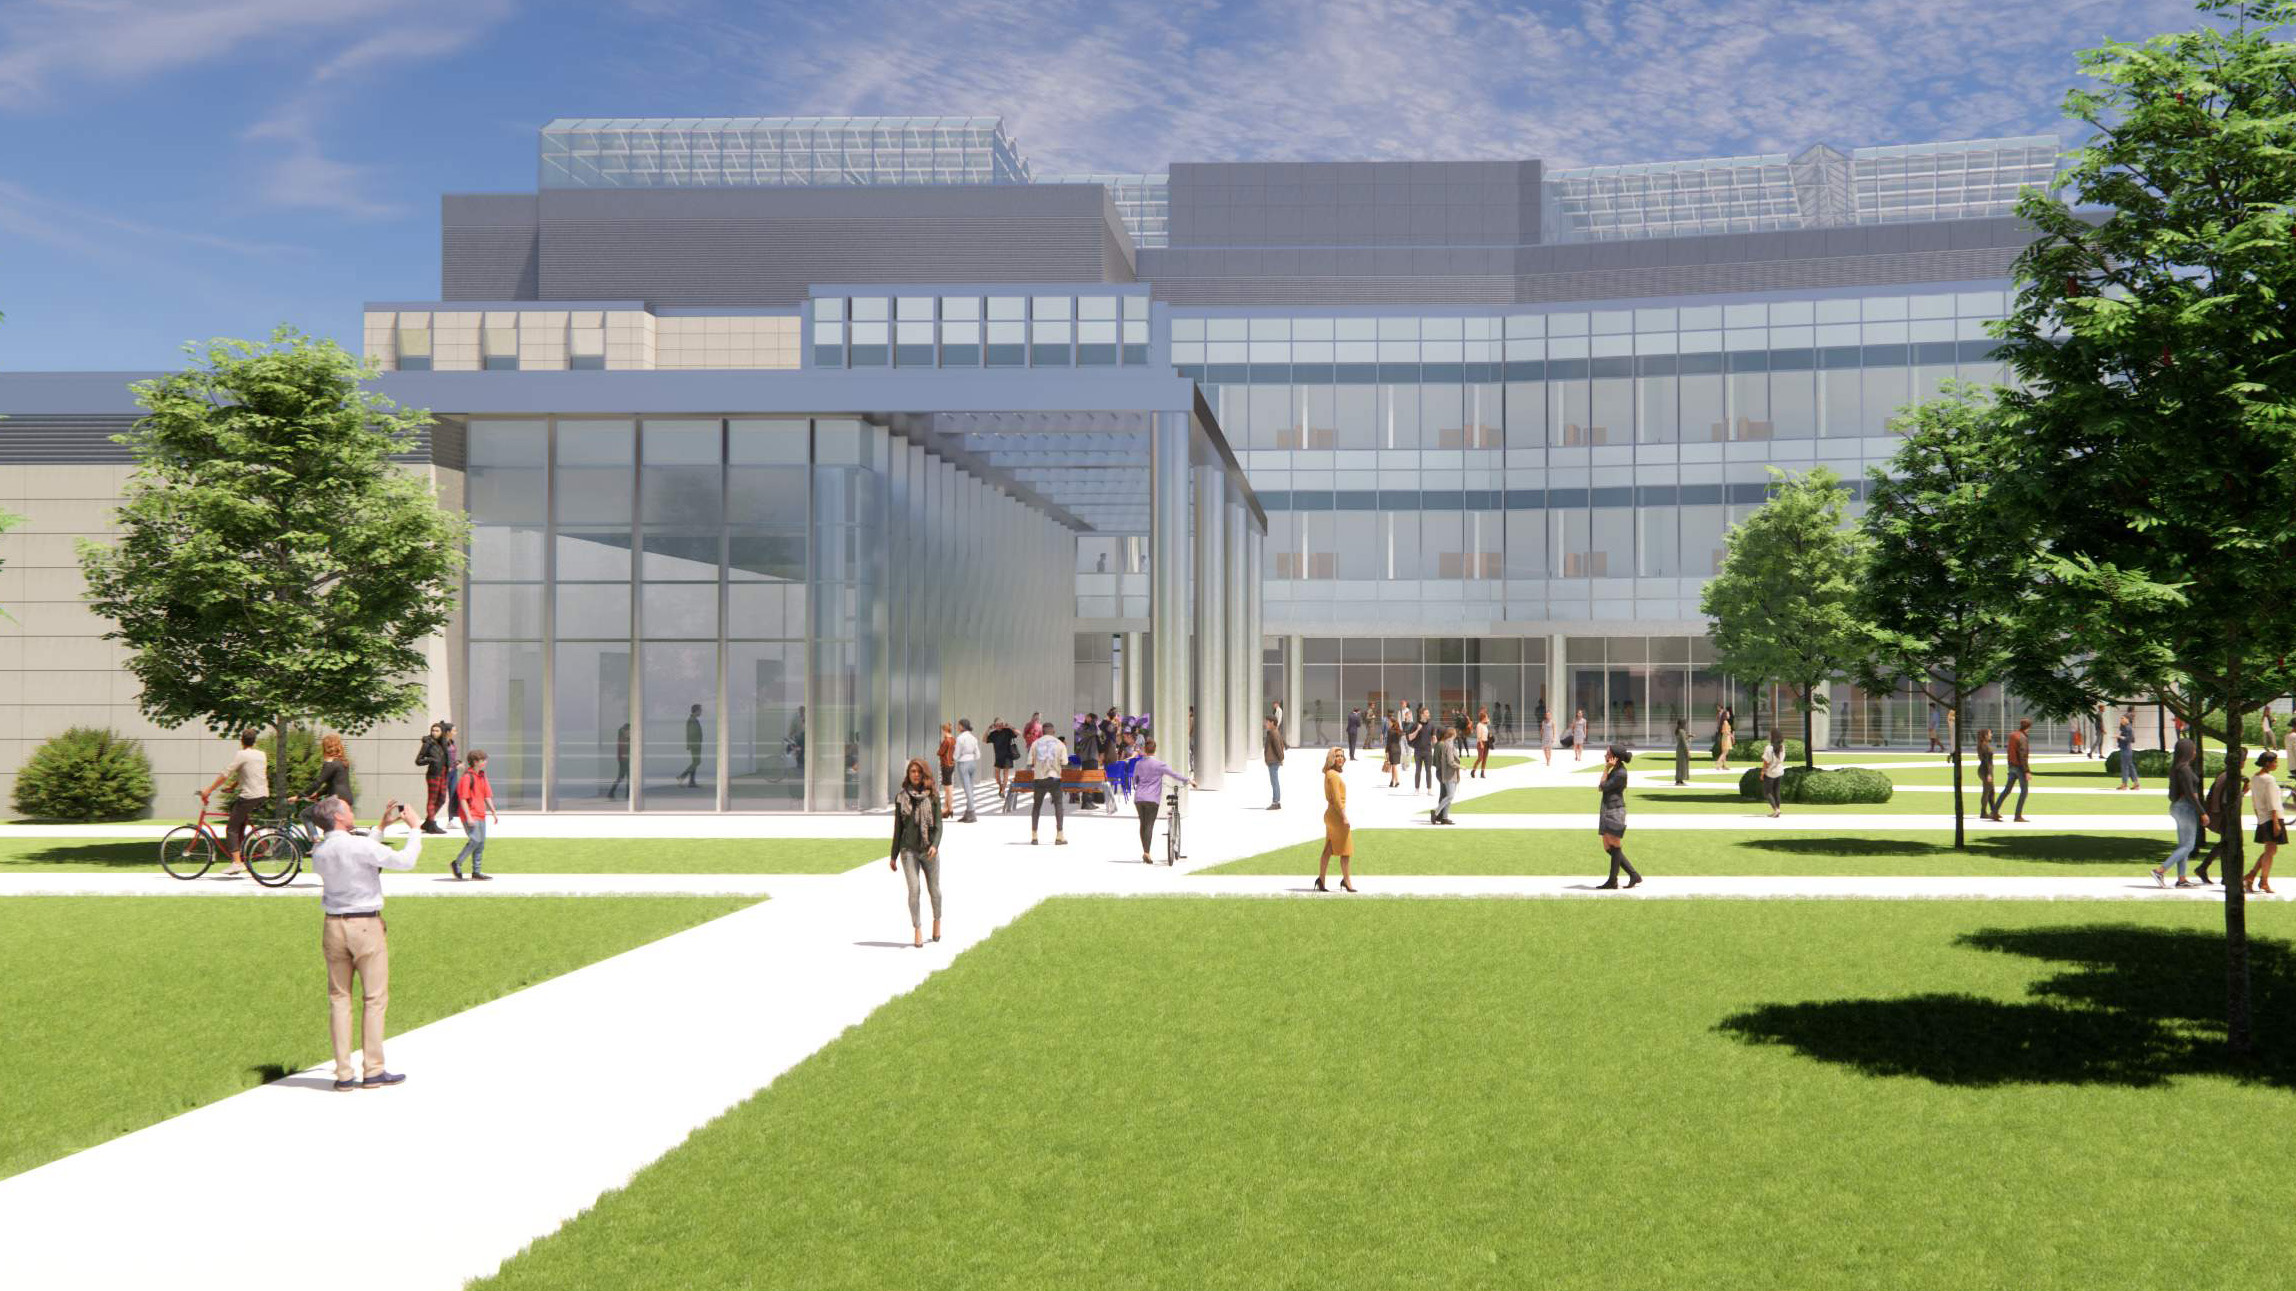 The building will create dynamic agricultural community, located on the south side of UK’s main campus near the planned Martin-Gatton Agricultural Sciences Building, the Barnhart Building and the Plant Science Building.